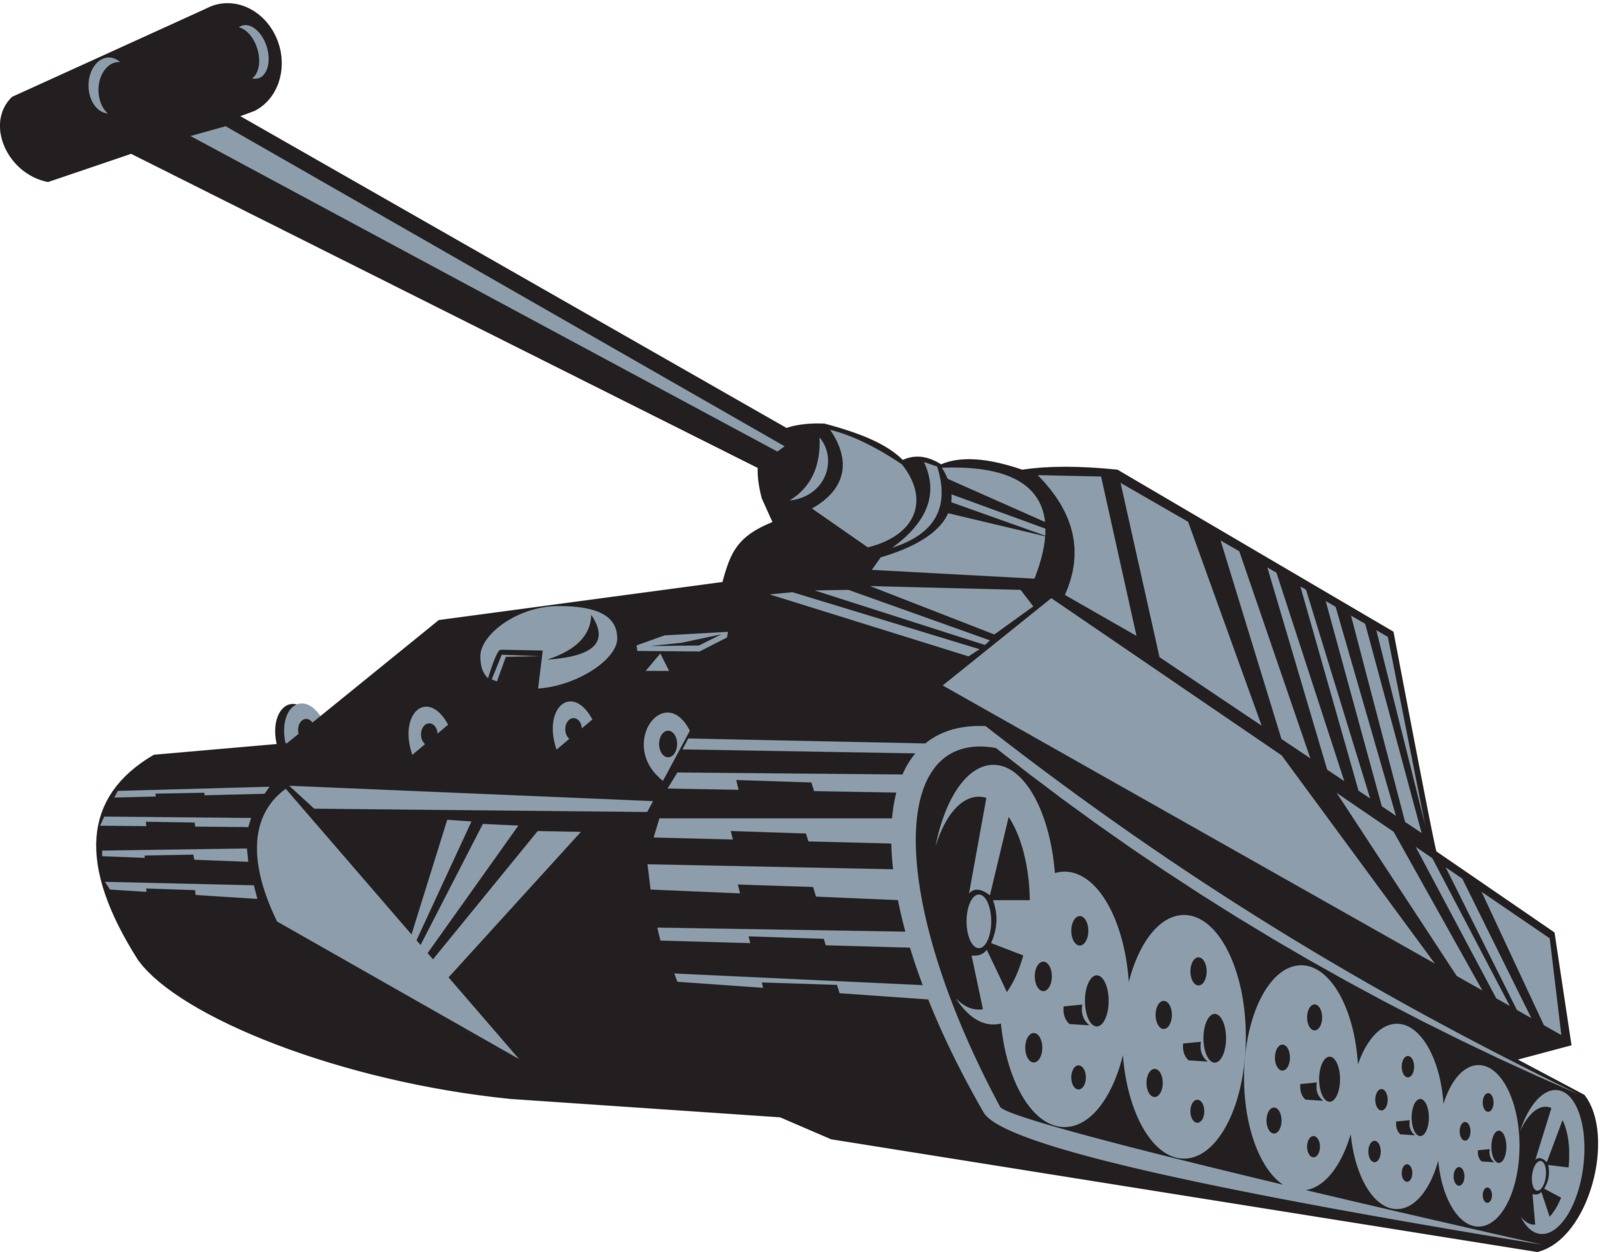 An army tank in retro style.